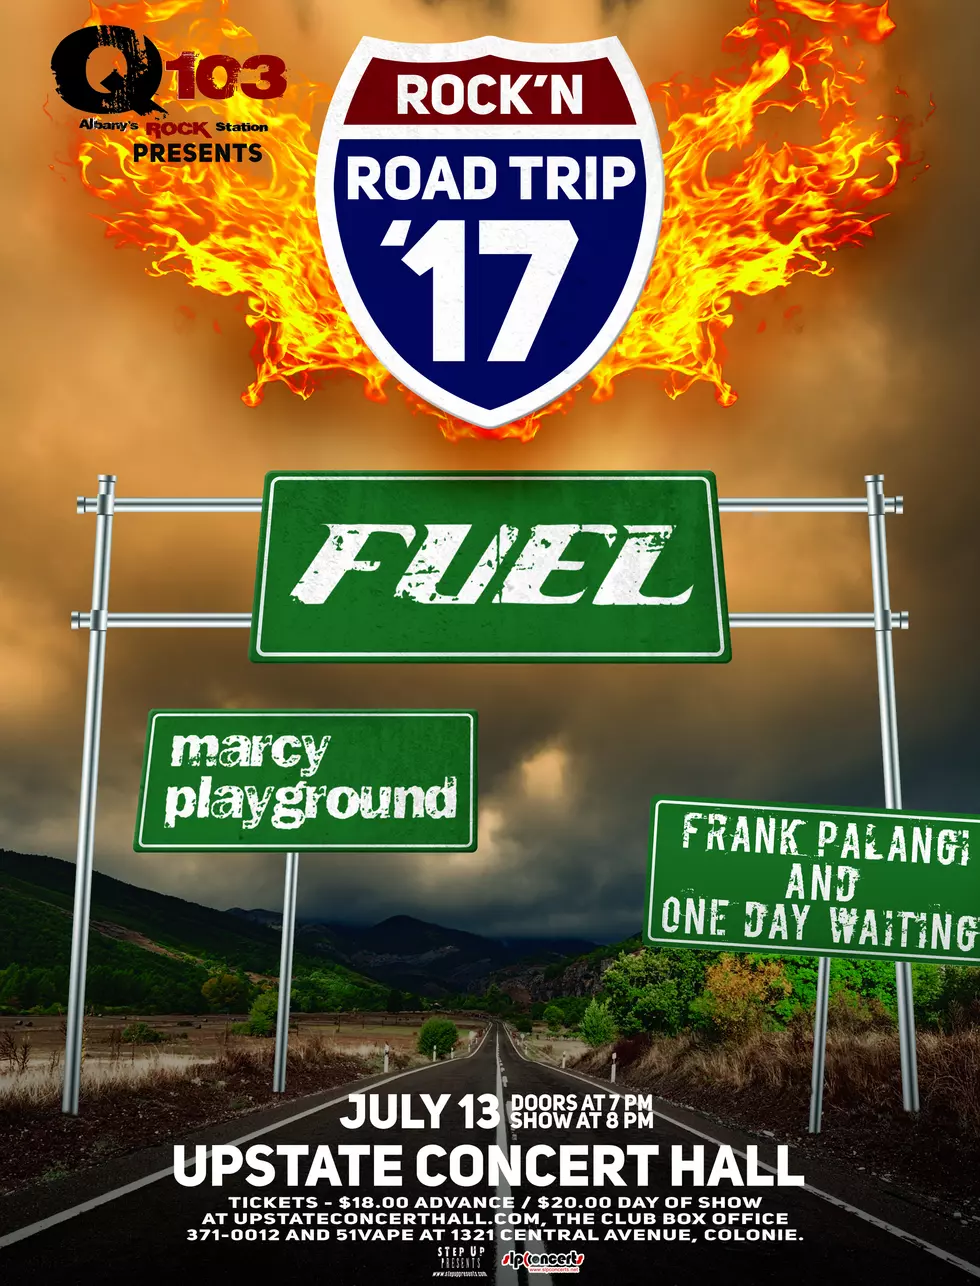 Q103 Presents Fuel&#8217;s &#8220;Rock&#8217;N Road Trip &#8217;17&#8221; Tour at the Upstate Concert Hall